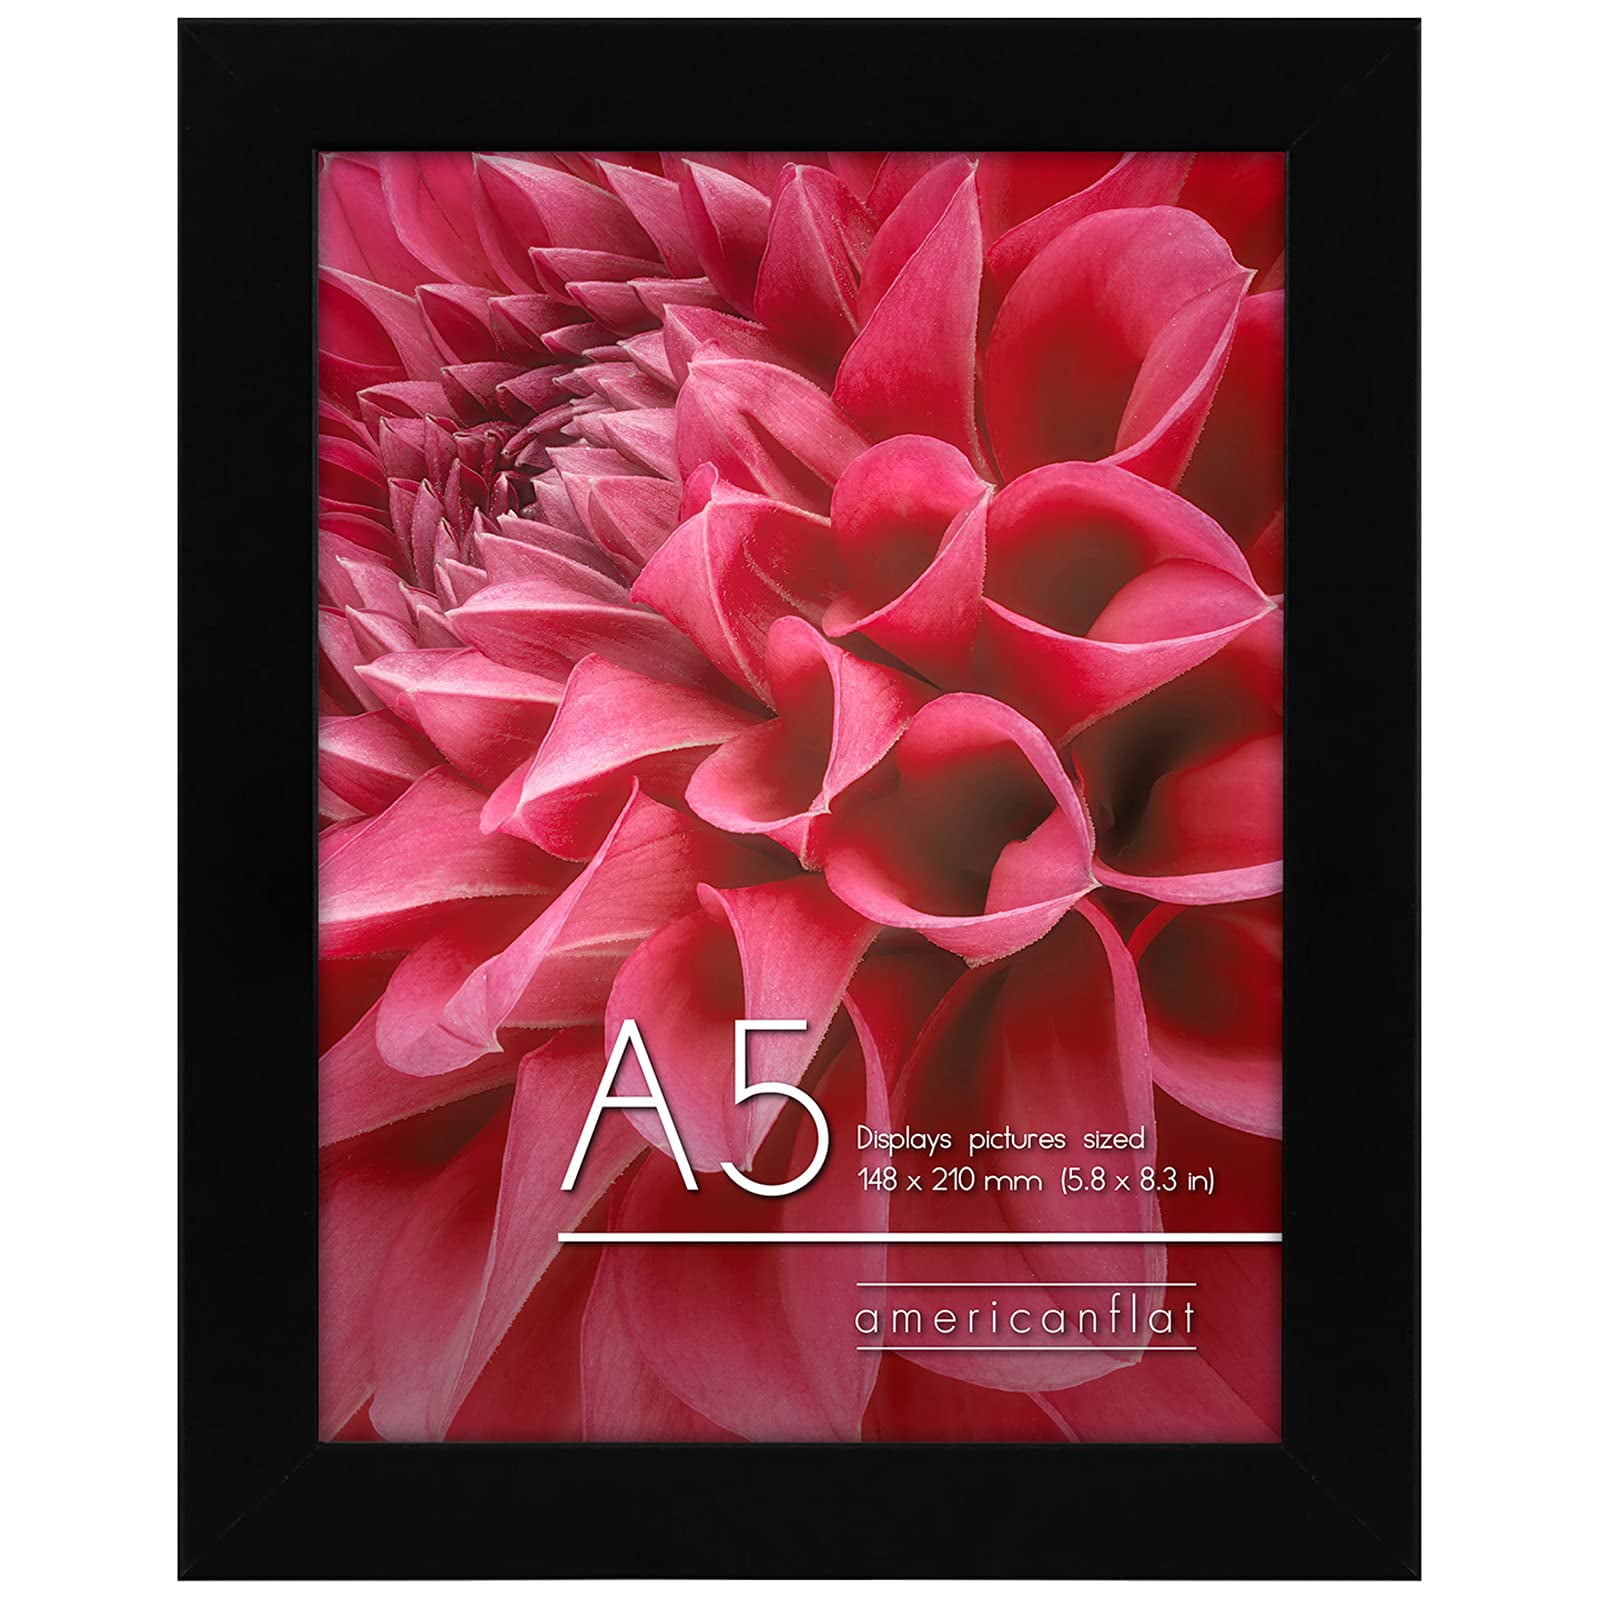 Composite Wood with Polished Glass for Tabletop Americanflat 5x7 Hinged Picture Frame in Black with Two Displays 